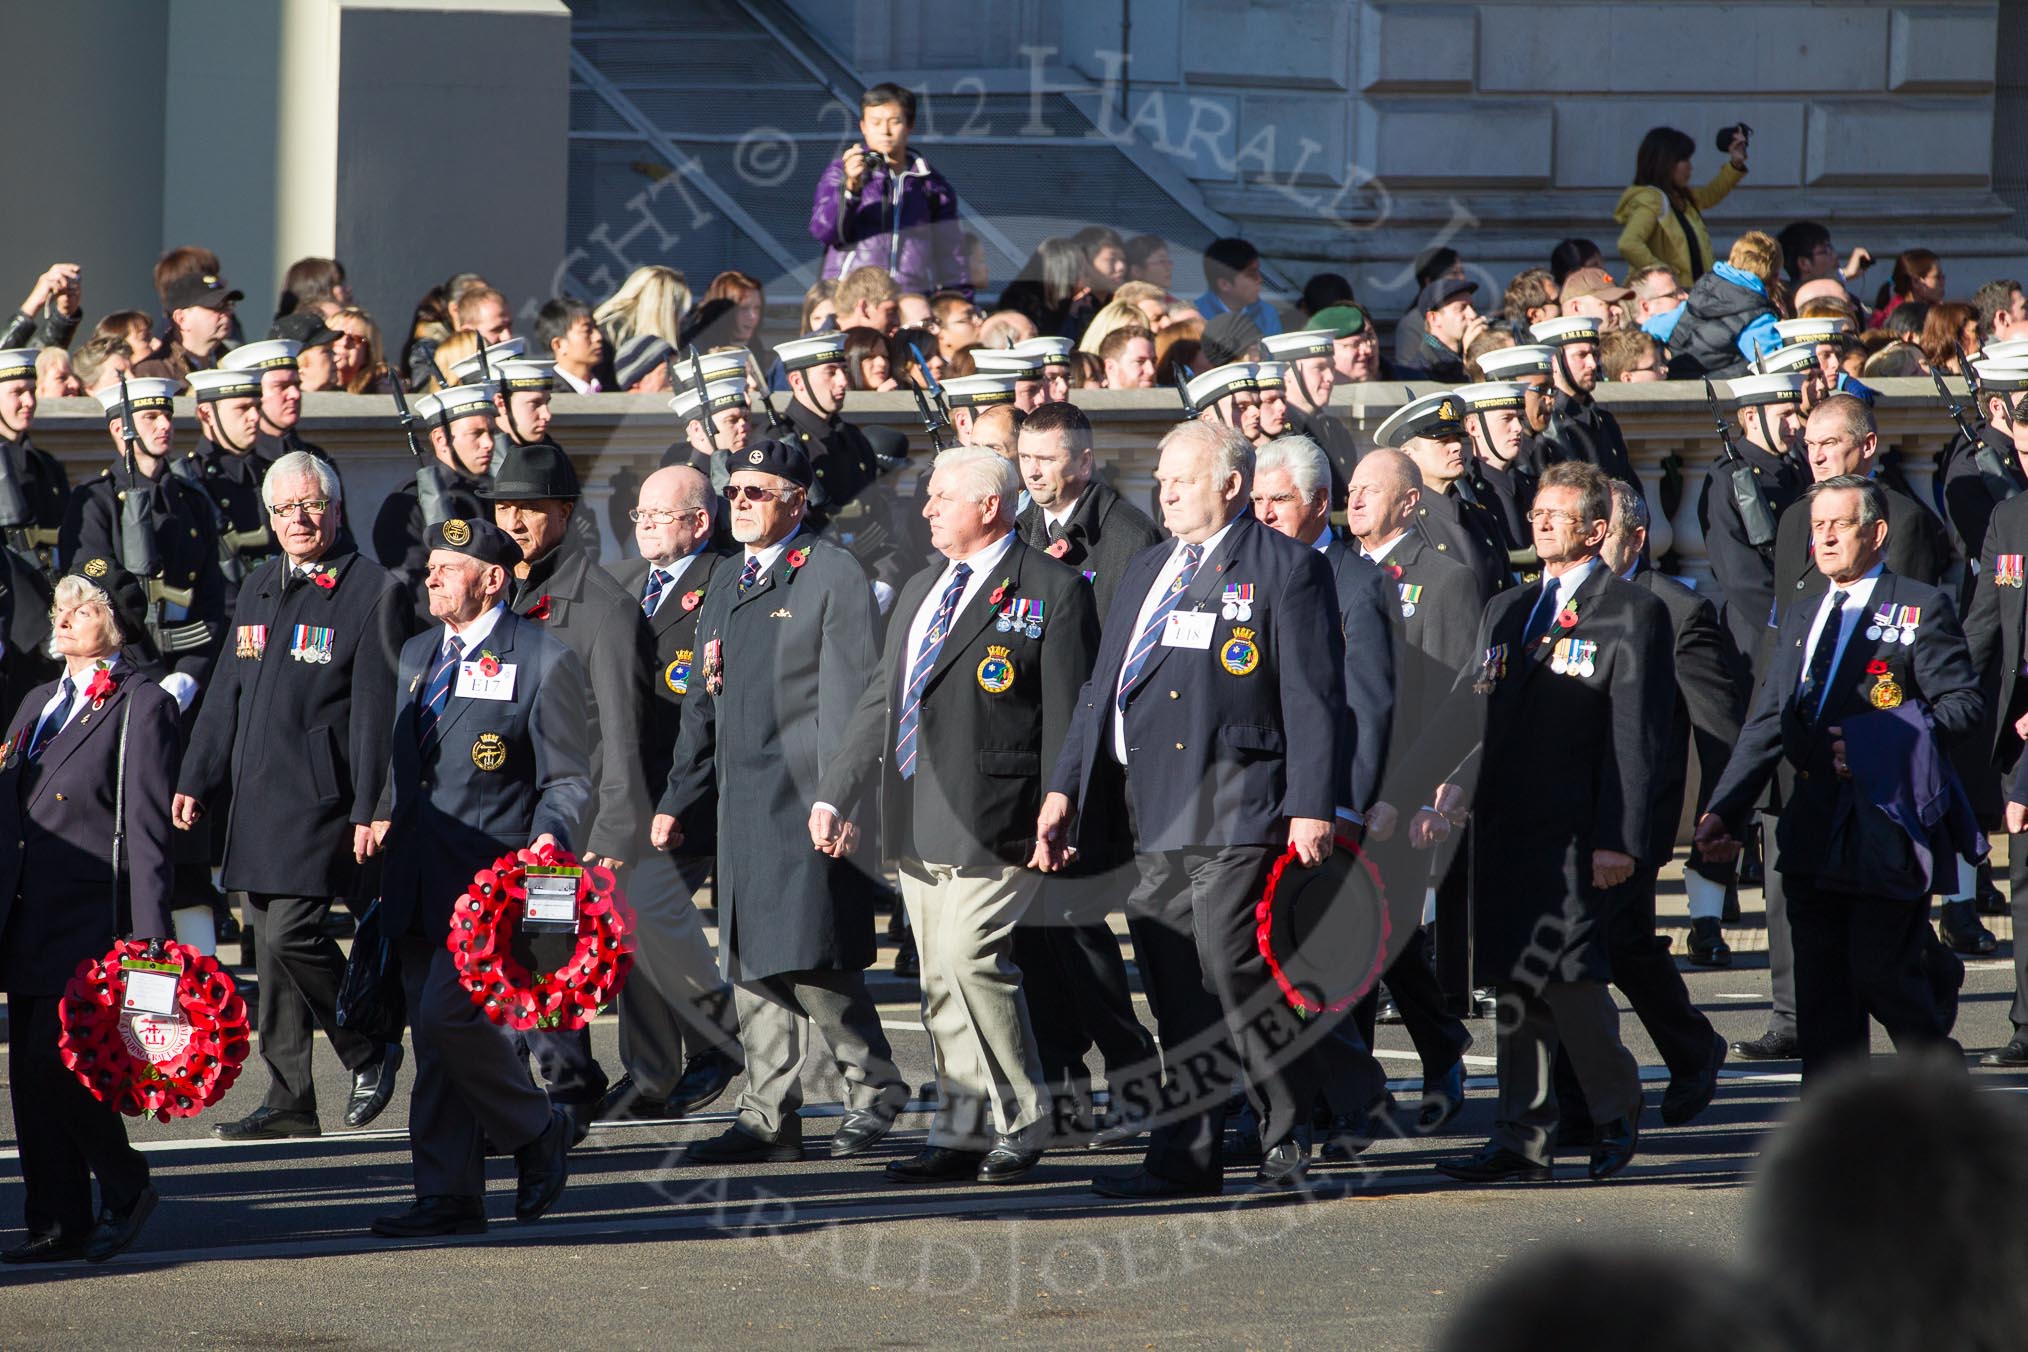 Remembrance Sunday 2012 Cenotaph March Past: Group E17 - LST & Landing Craft Association and E18 - HMS Andromeda Association..
Whitehall, Cenotaph,
London SW1,

United Kingdom,
on 11 November 2012 at 11:40, image #128